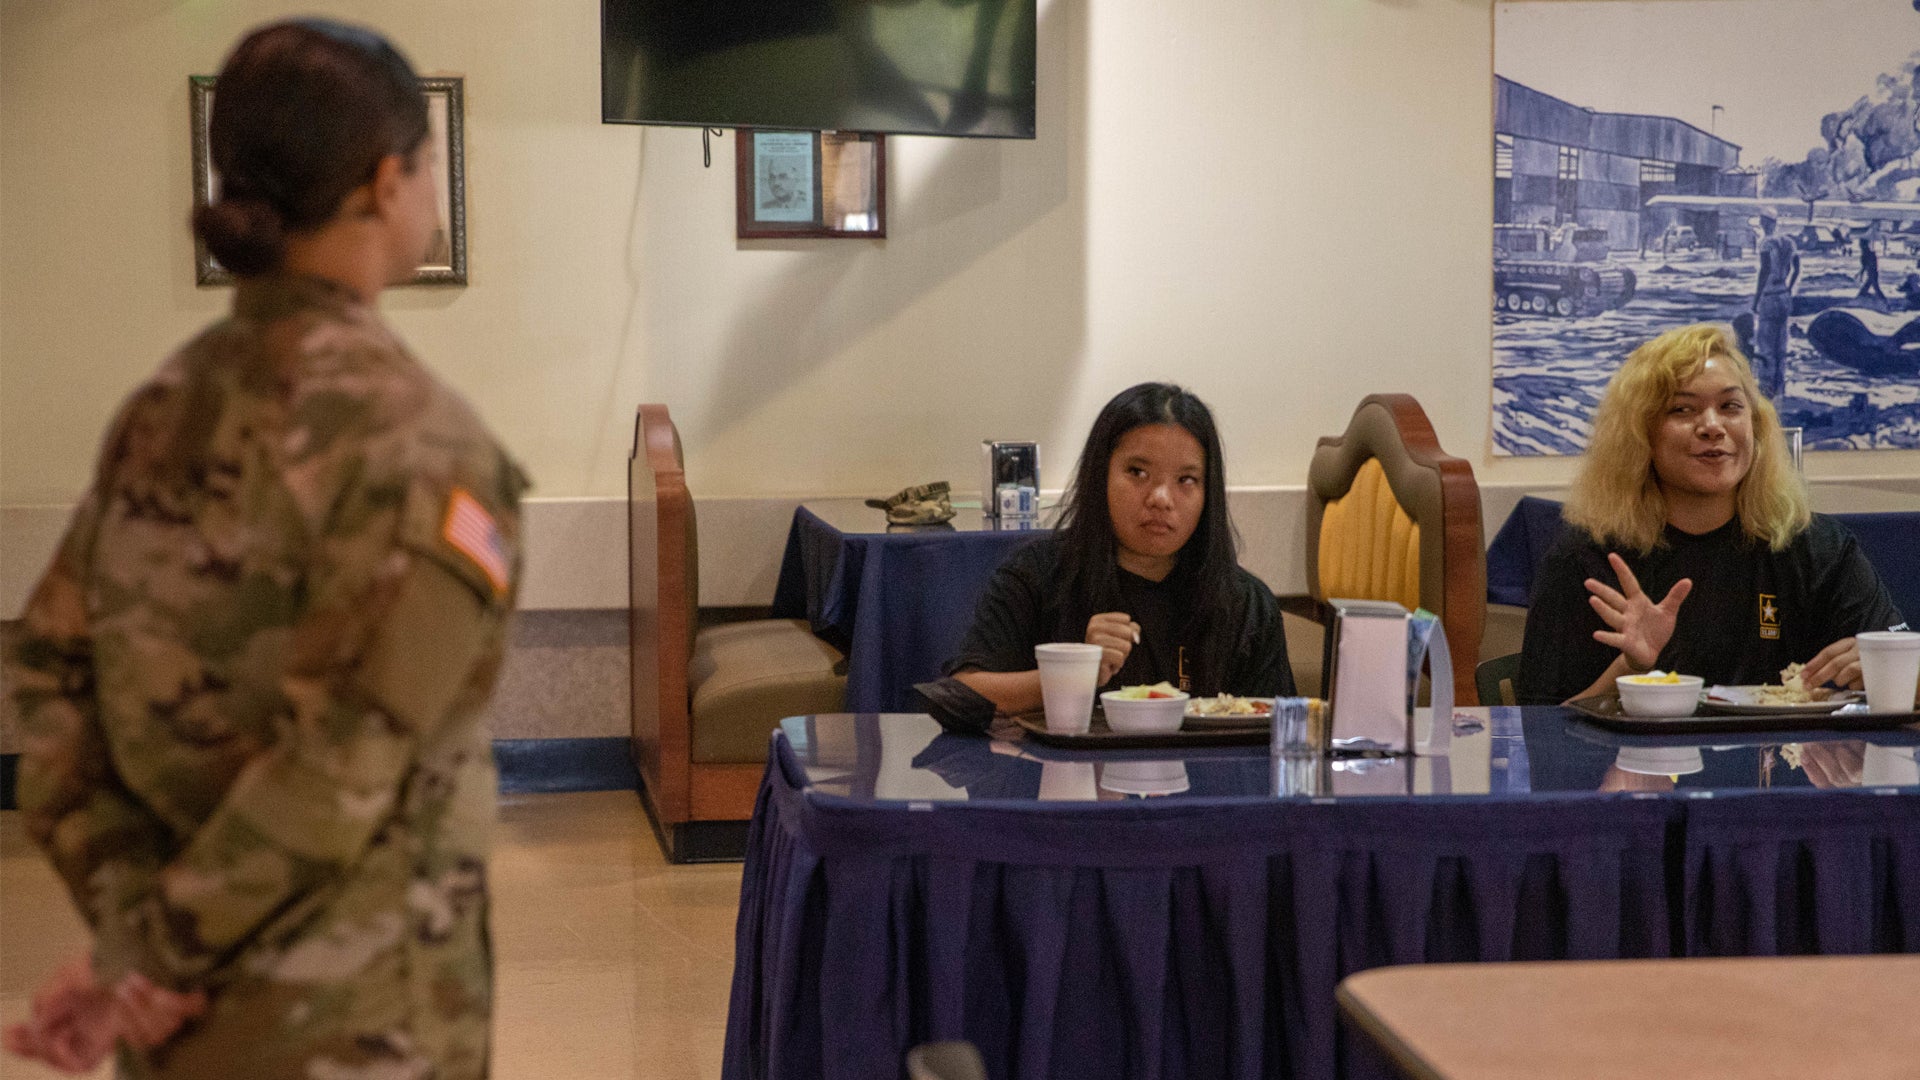 A soldier speaks to potential recruits during Army National Hiring Day on June 7, 2021 at Schofield Barracks K Quad Dining Facility, at Schofield Barracks, Hawaii. (Spc. Michael Bradle/U.S. Army)